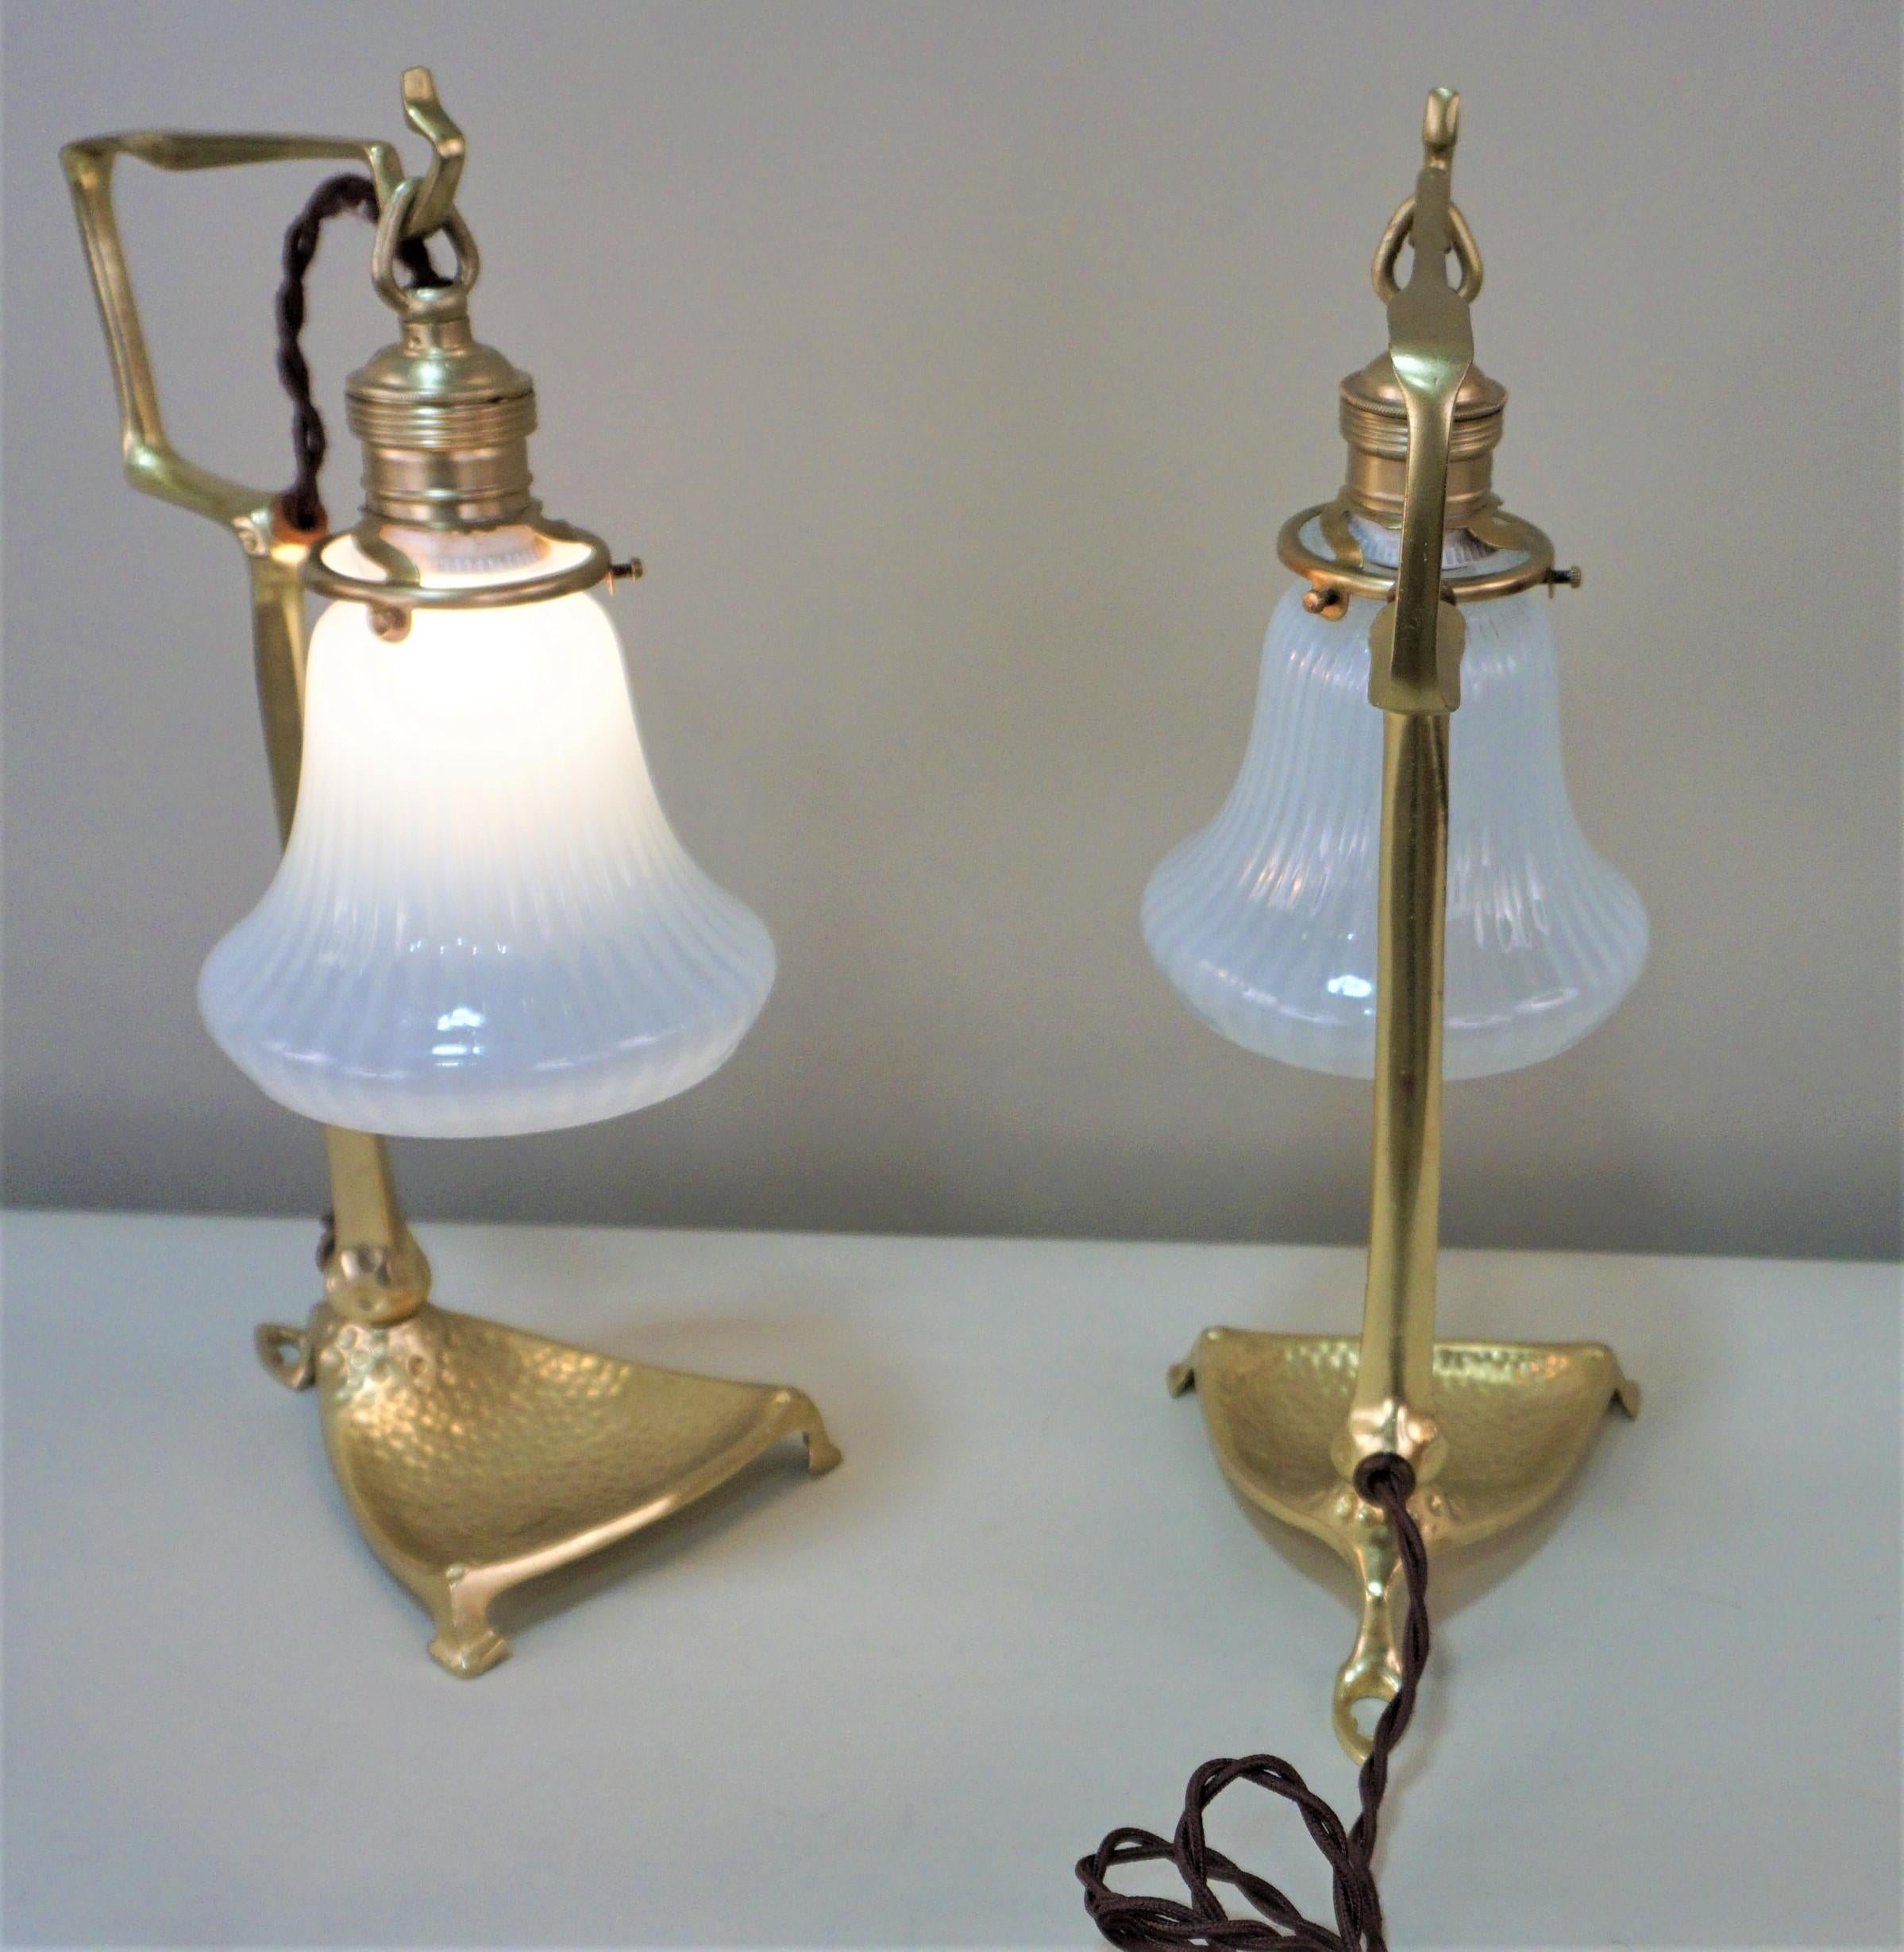 Early 20th Century Art Nouveau Table Lamps by Friedrich Adler